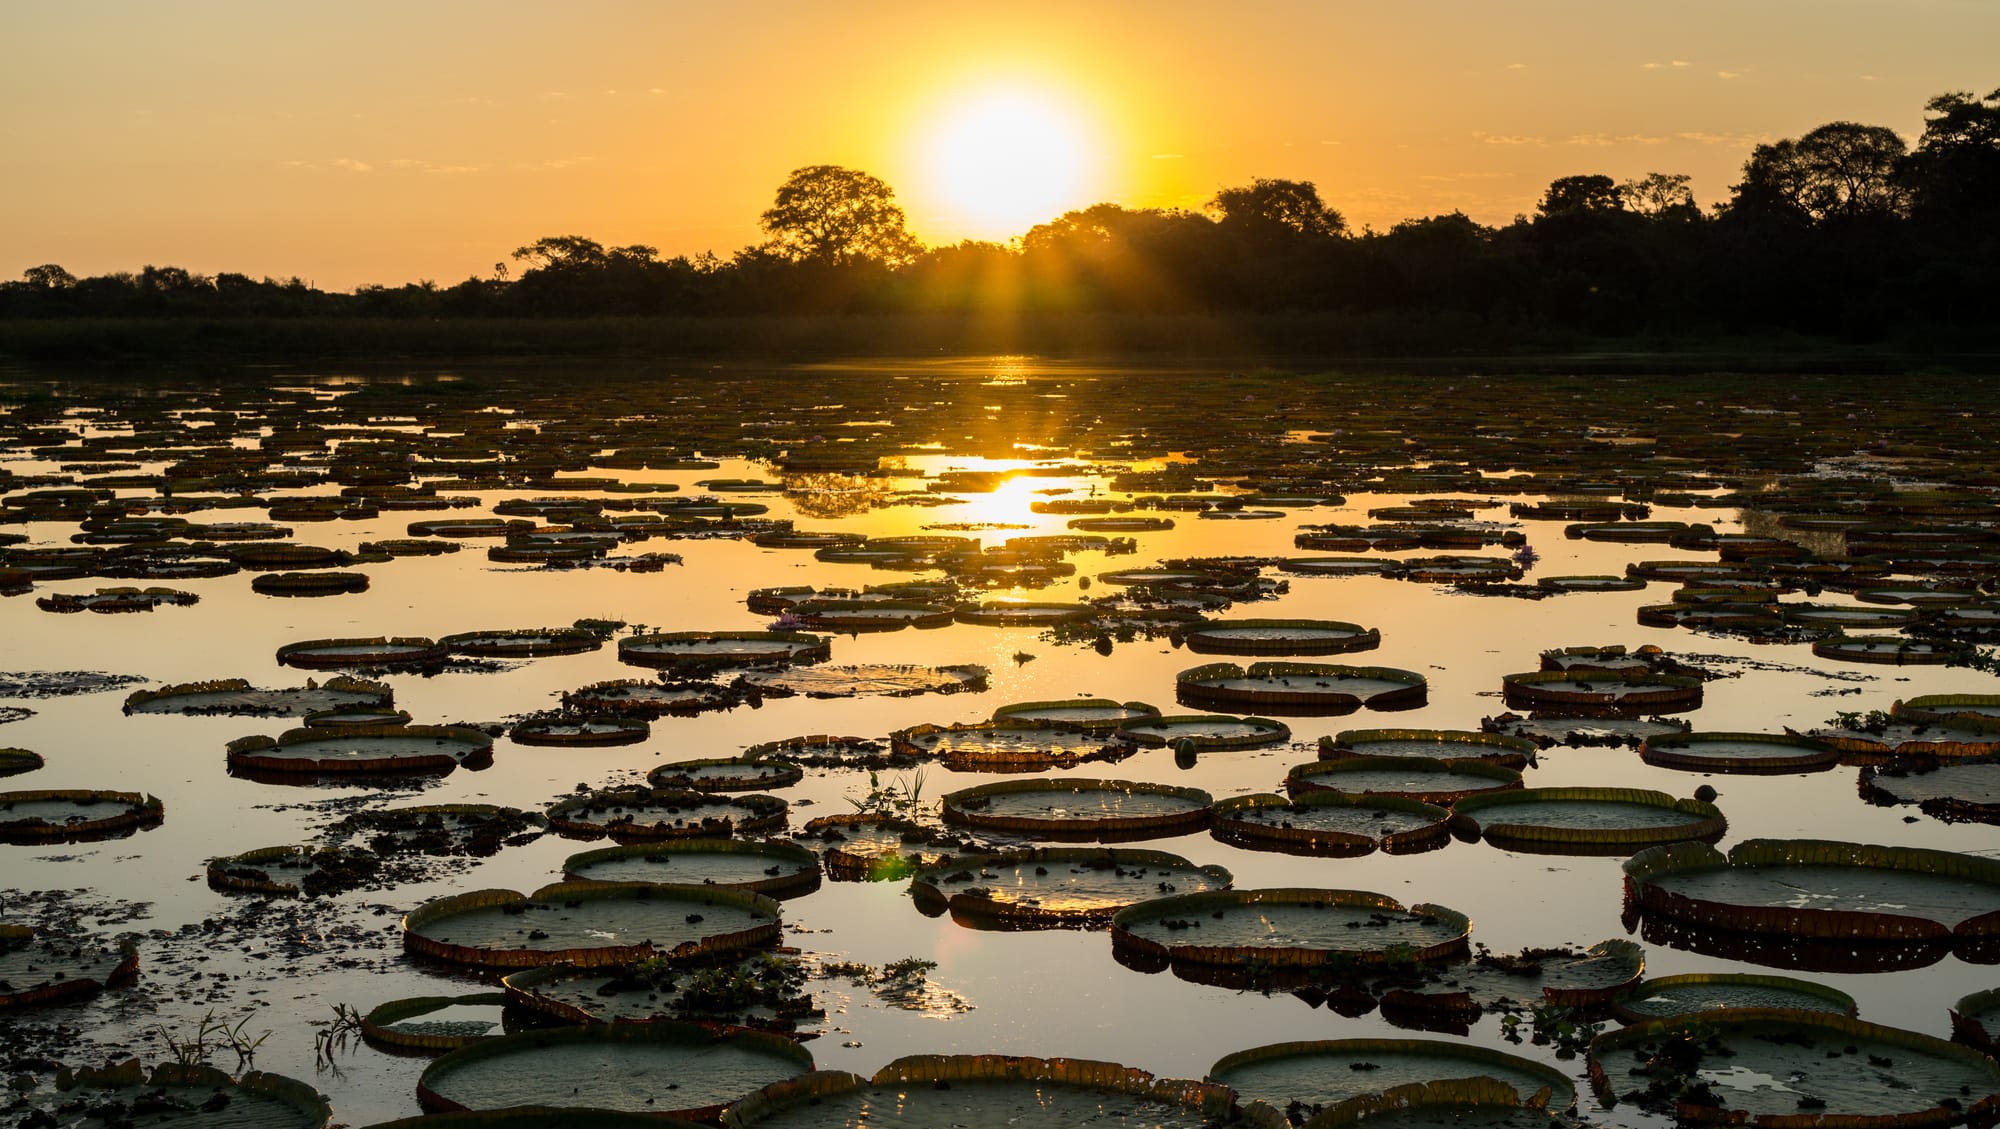 Sunset in pantanal wetlands with pond, ipe trees and victoria regia